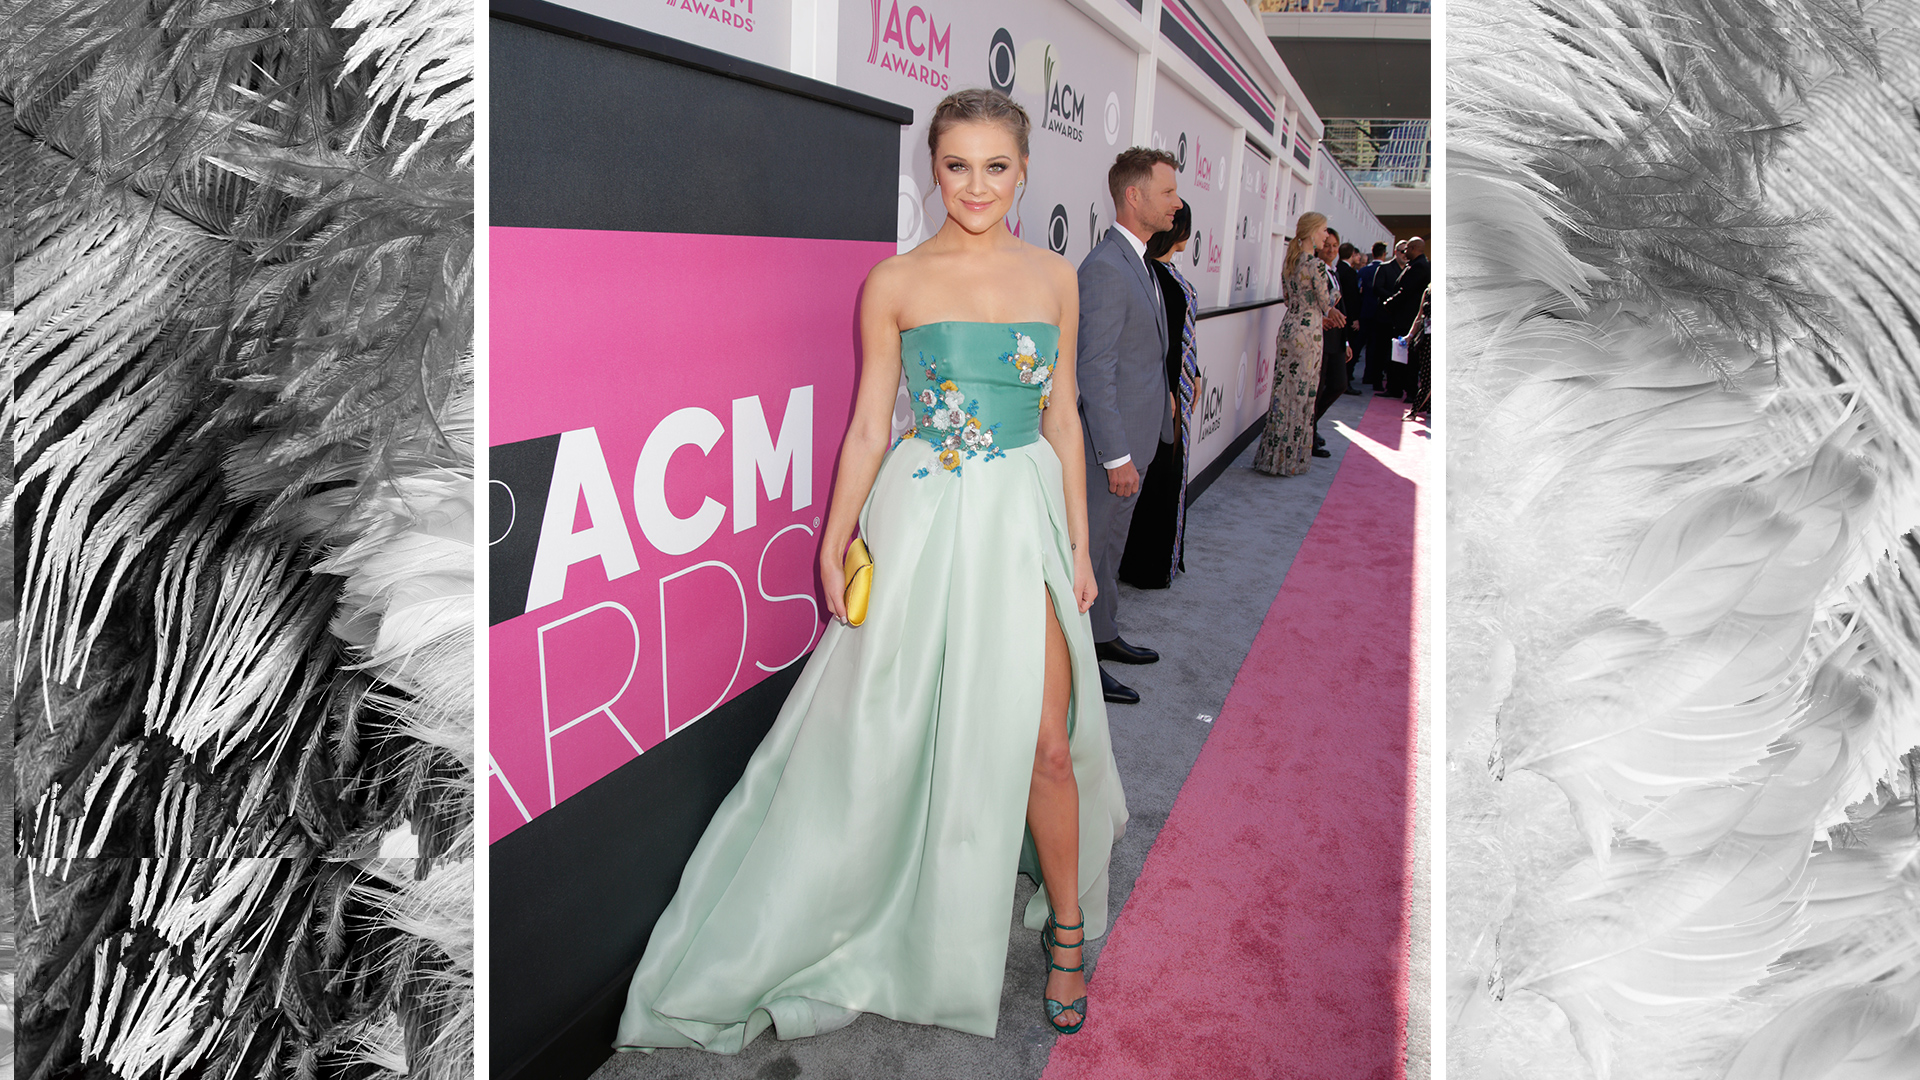 Kelsea Ballerini is dreamy in a pastel color-blocked dress with thigh-high slit.